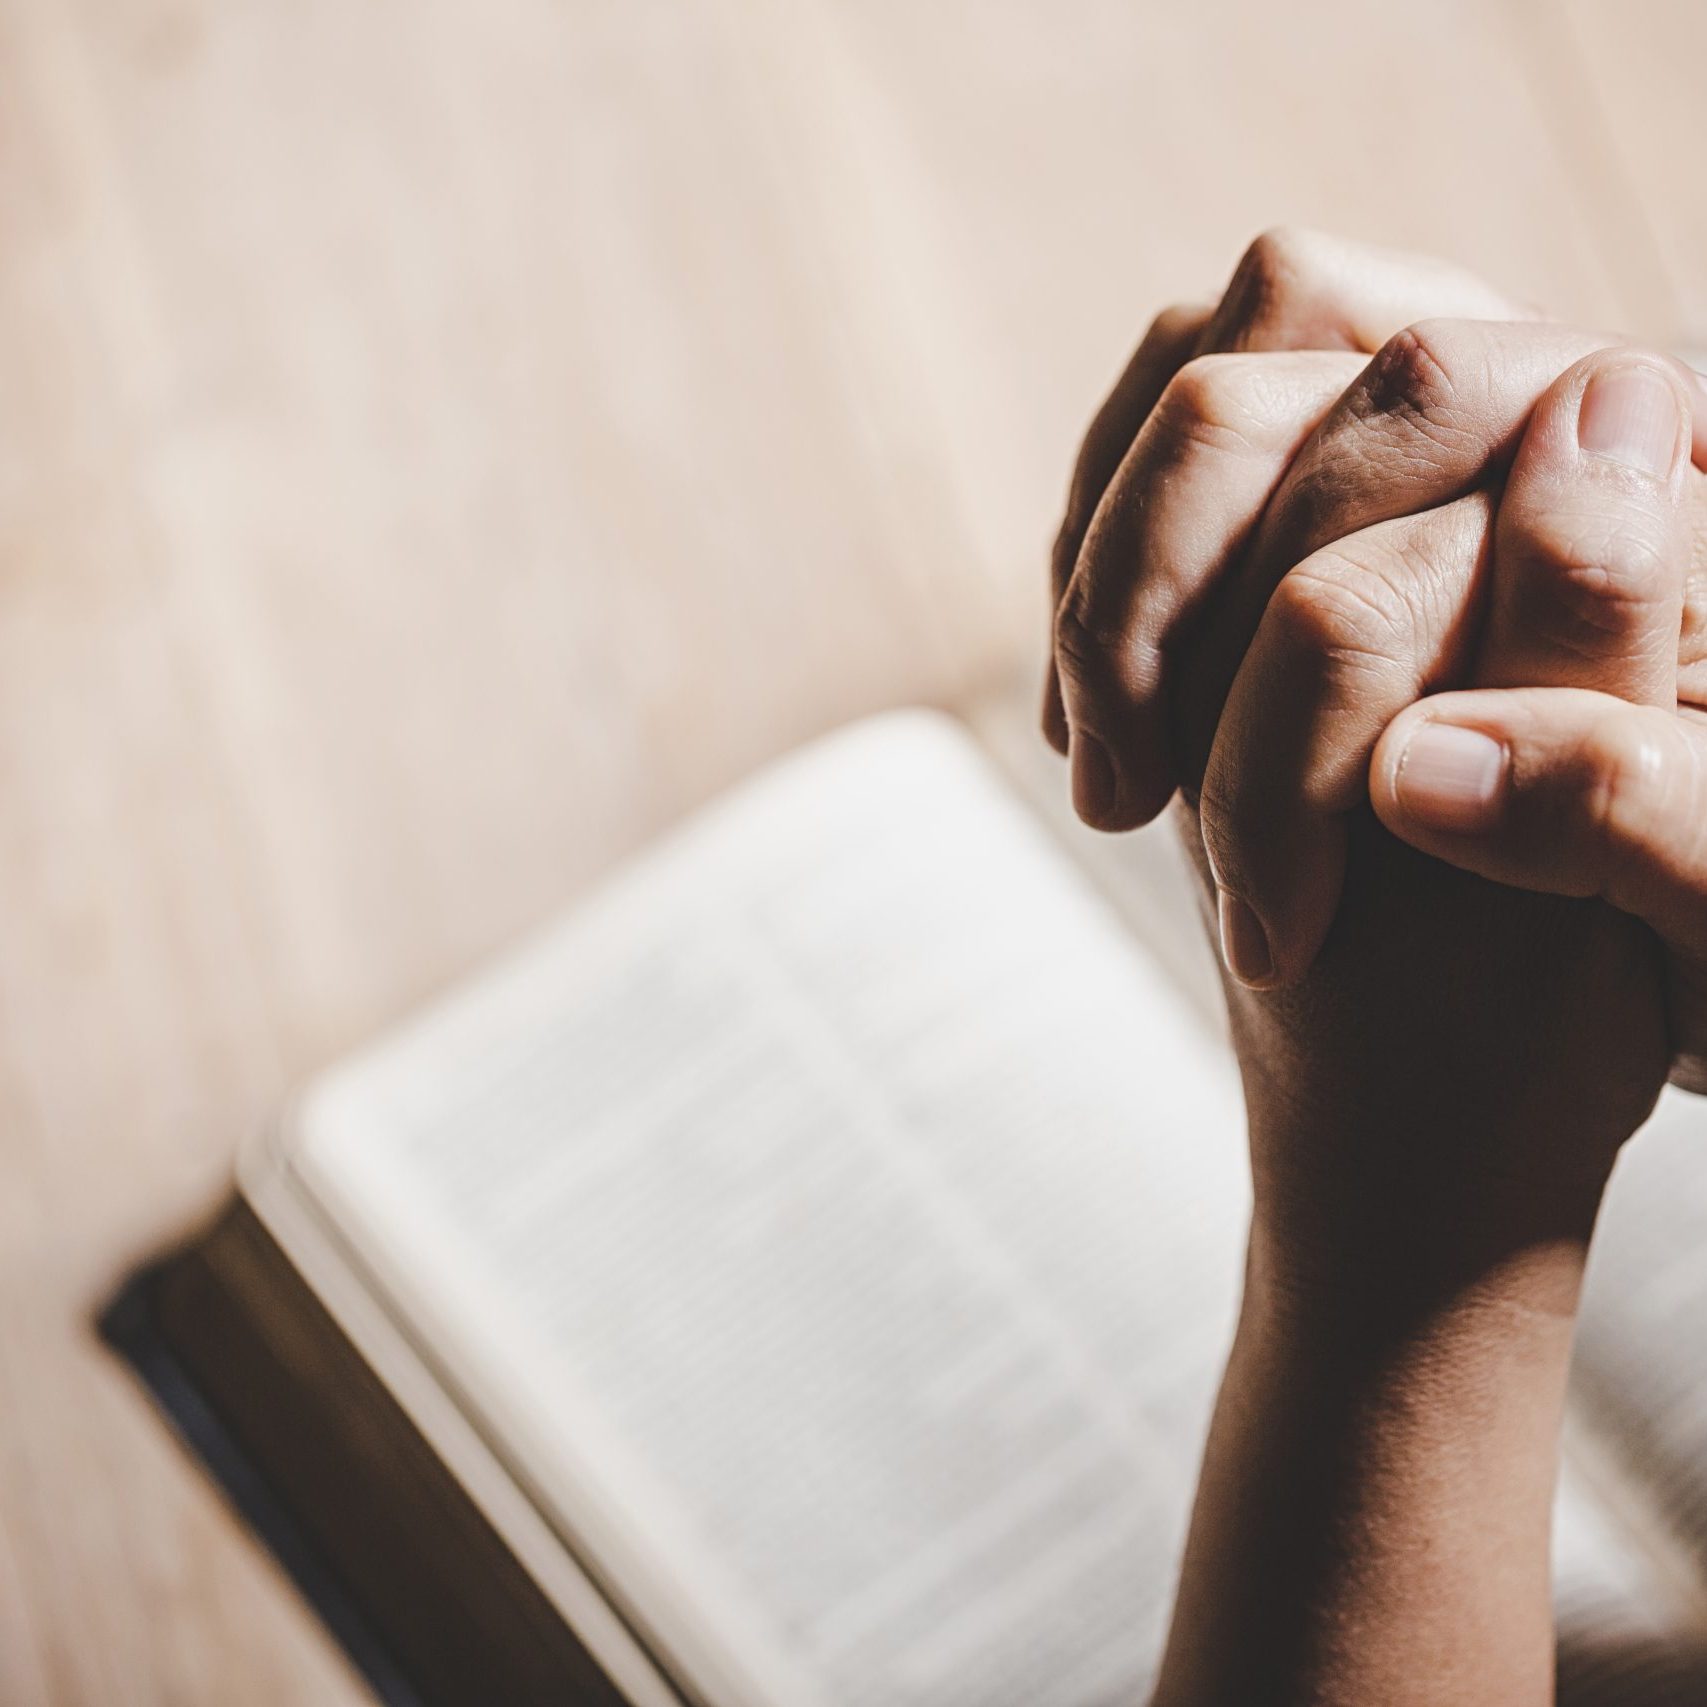 Spirituality and religion, Hands folded in prayer on a Holy Bible in church concept for faith.